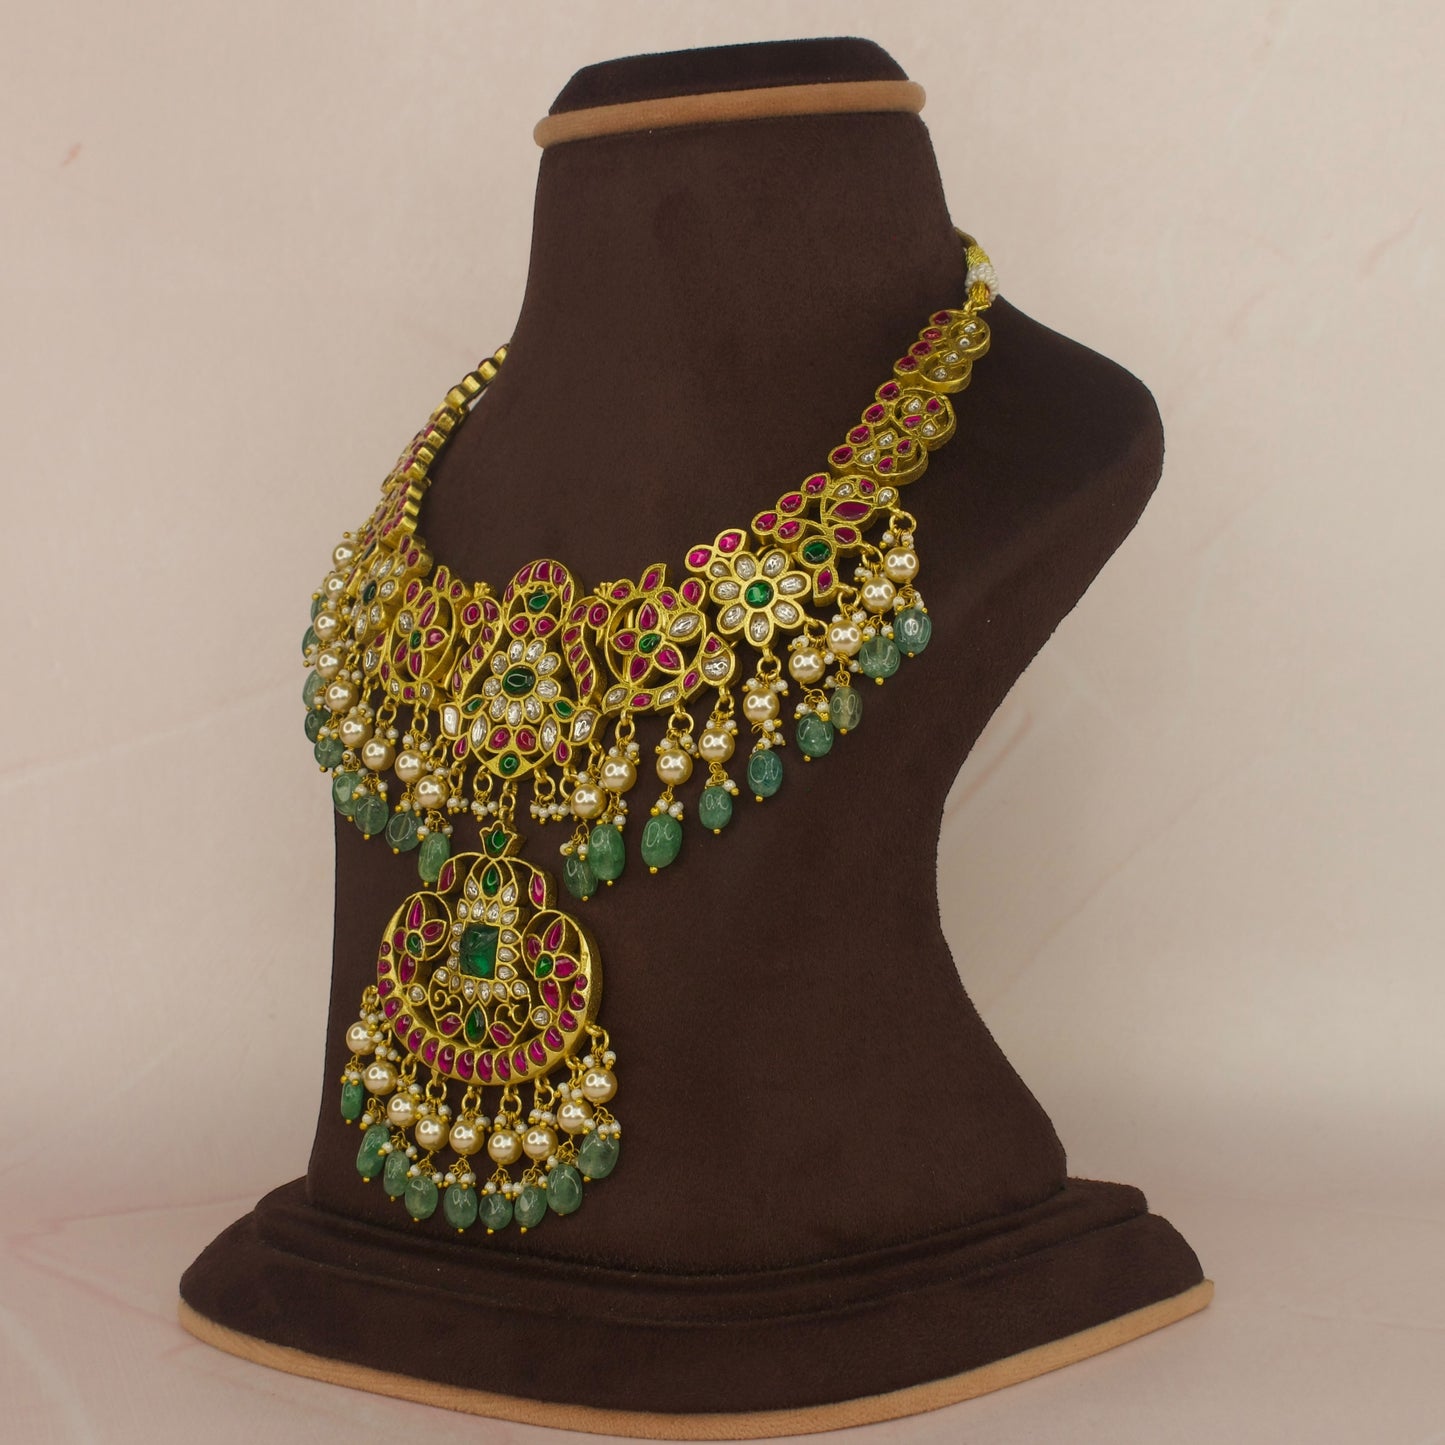 This is a Jadau Kundan Necklace with motifs on it. The piece has Pearls and Russian beads drops and 22k Gold plating